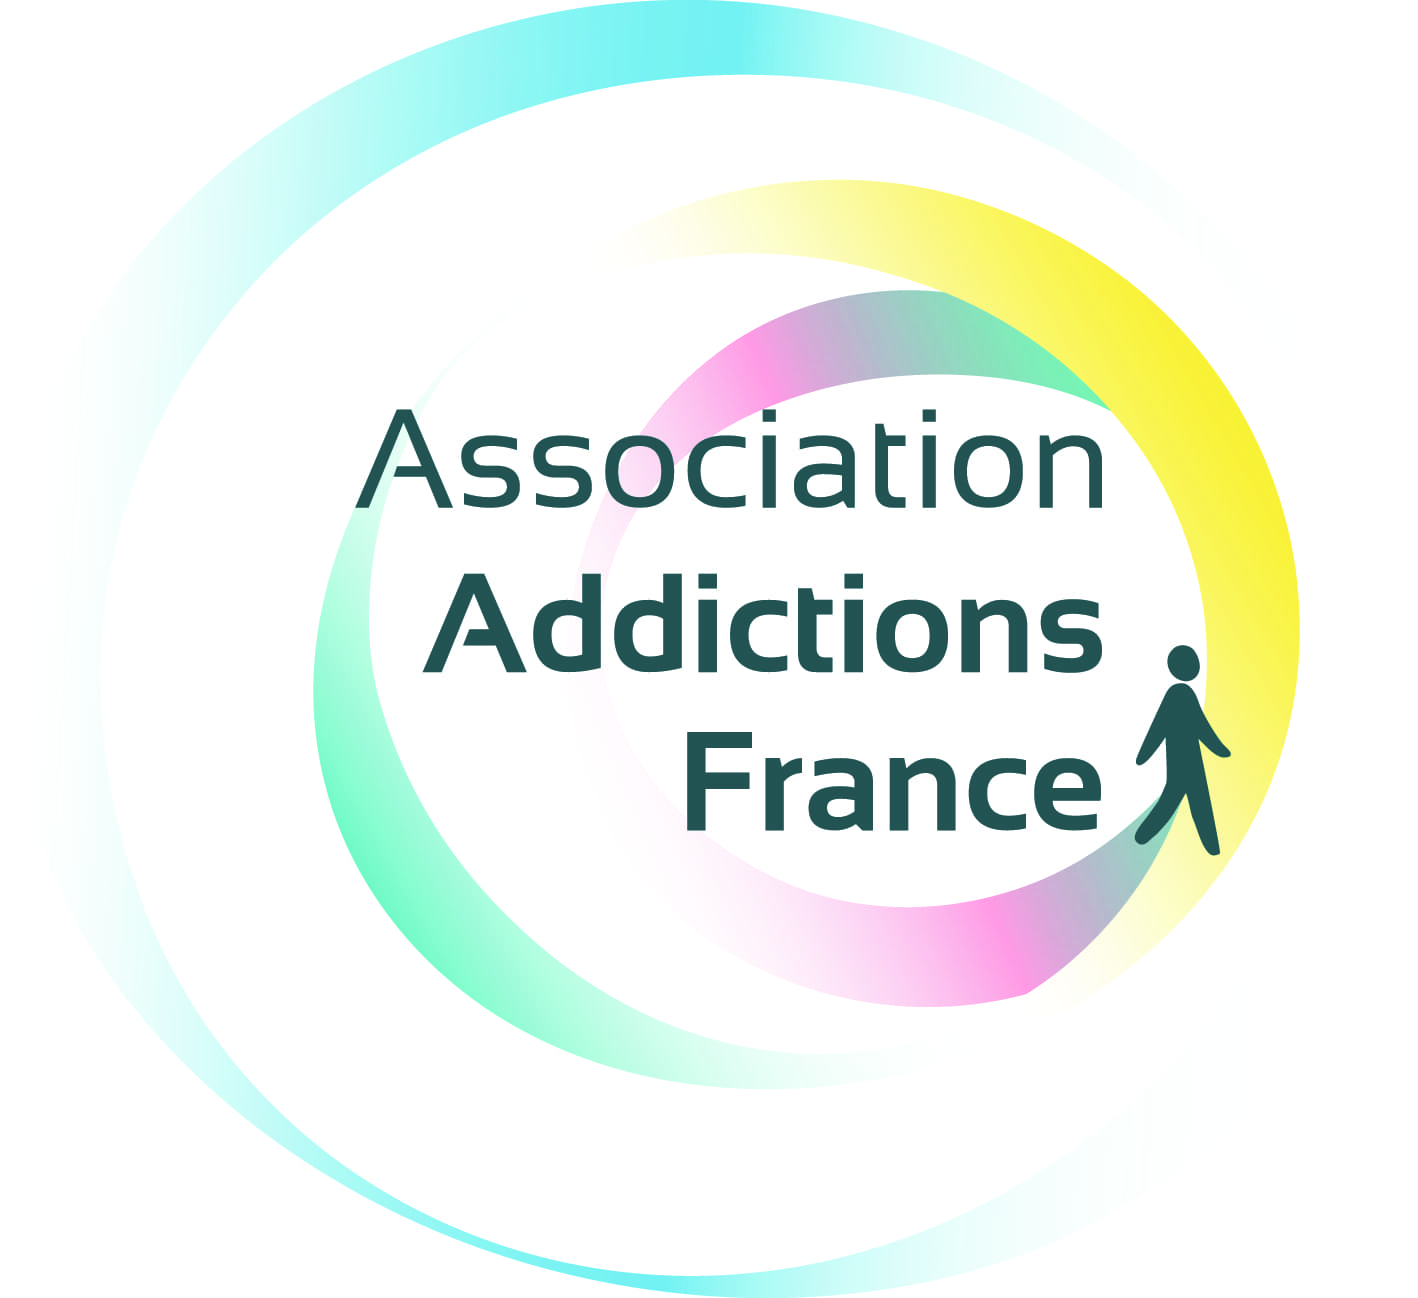 Addiction France, client Opentime